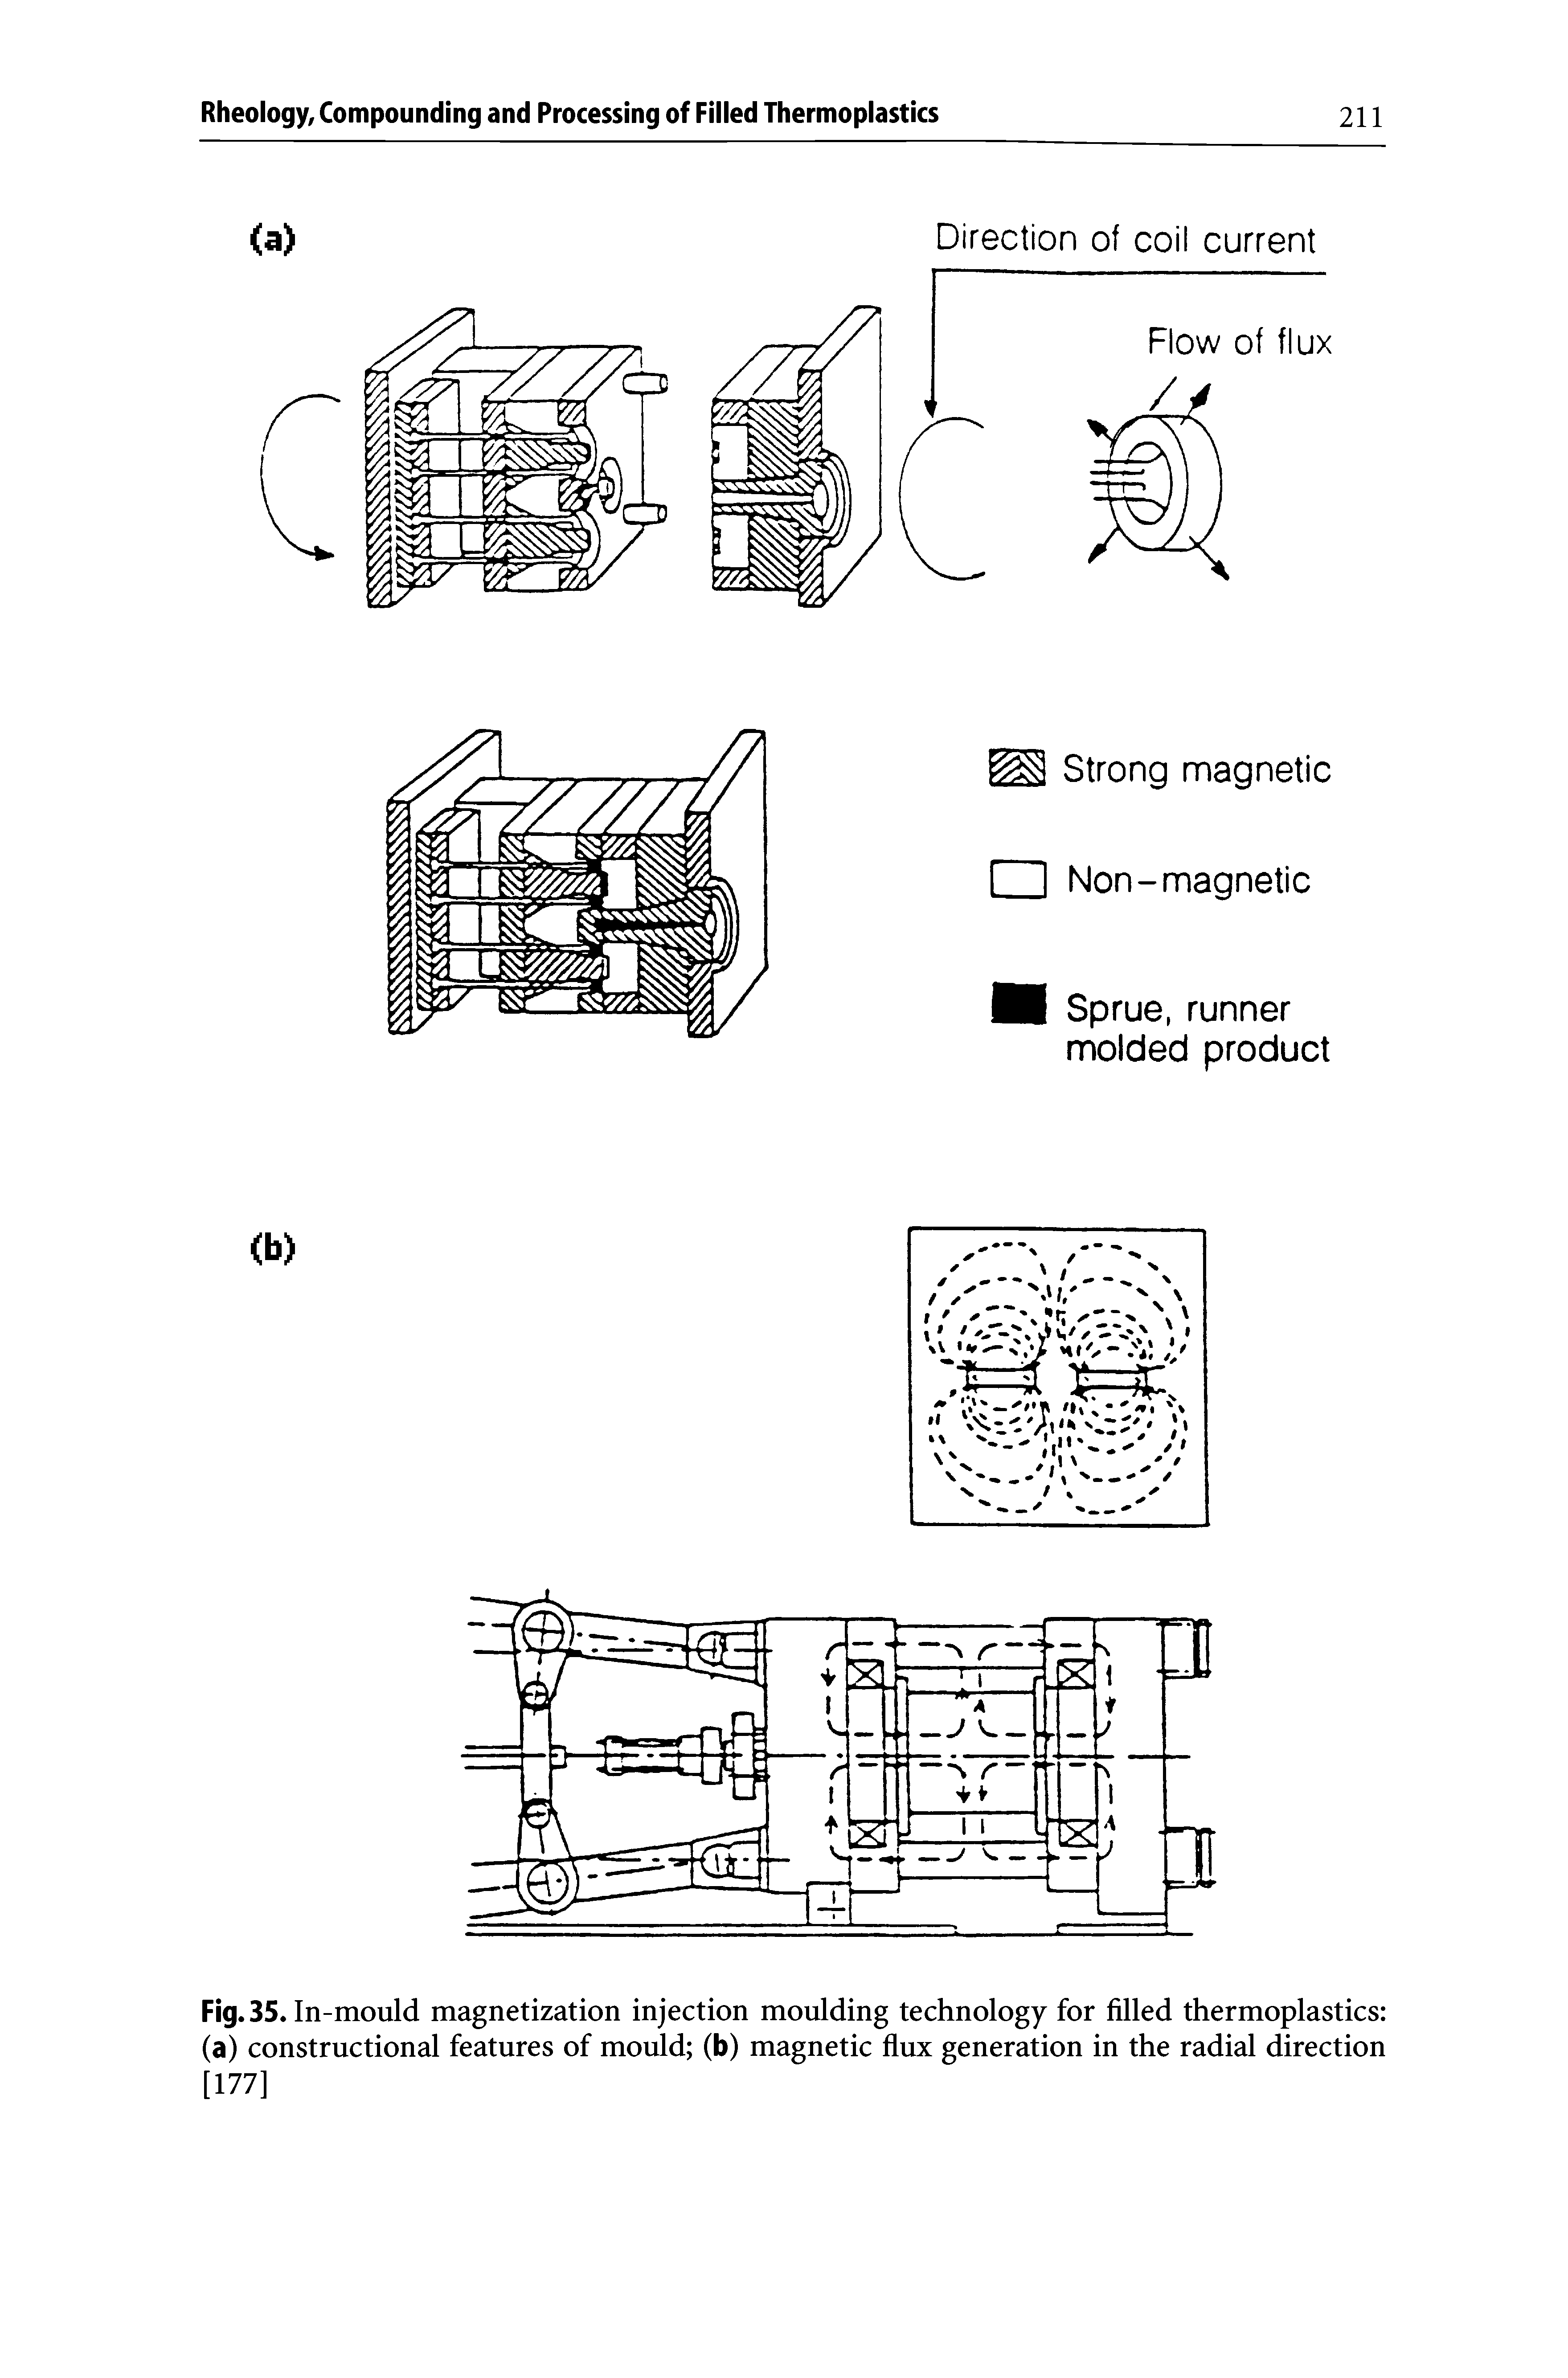 Fig. 35. In-mould magnetization injection moulding technology for filled thermoplastics (a) constructional features of mould (b) magnetic flux generation in the radial direction [177]...